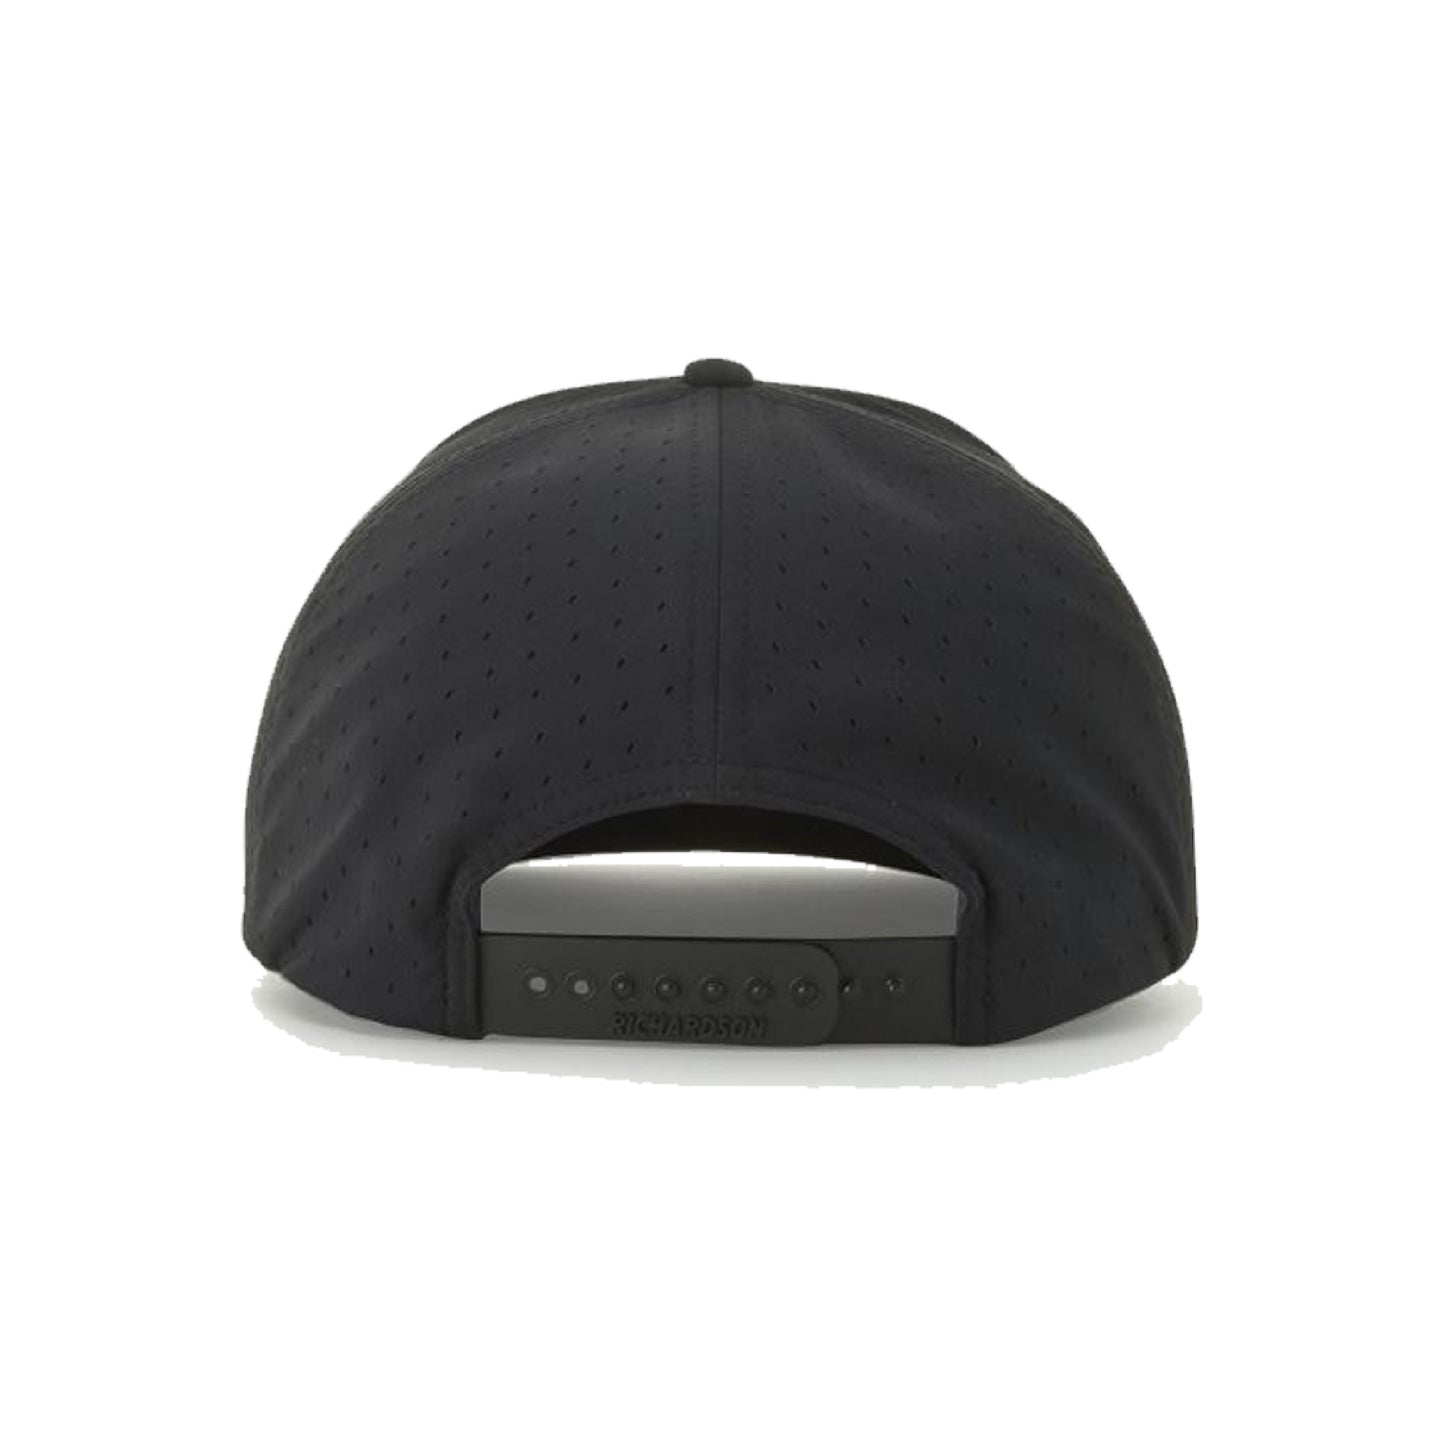 Richardson 7-Panel Perforated Cannon Cap